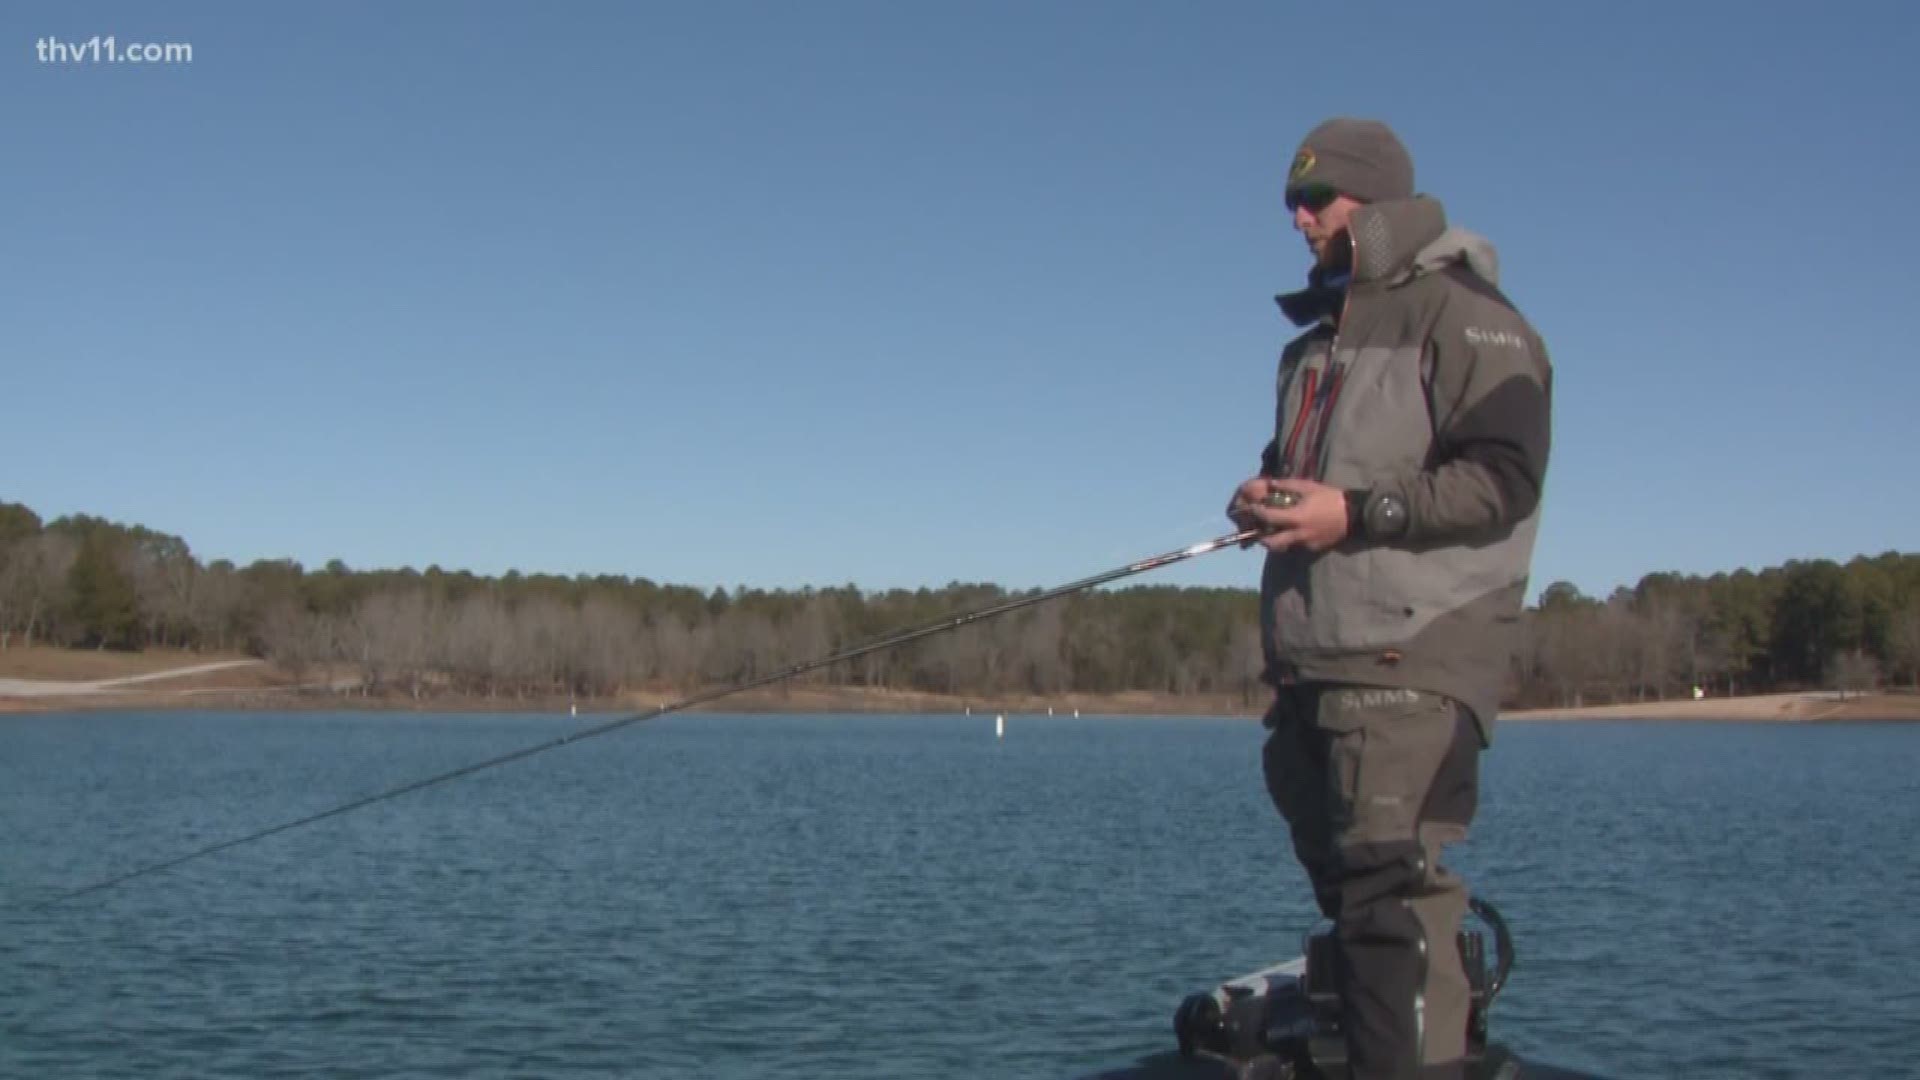 Arkansas native Cody Kelley is a professional angler. He tells us about doing a job that he is so passionate about.